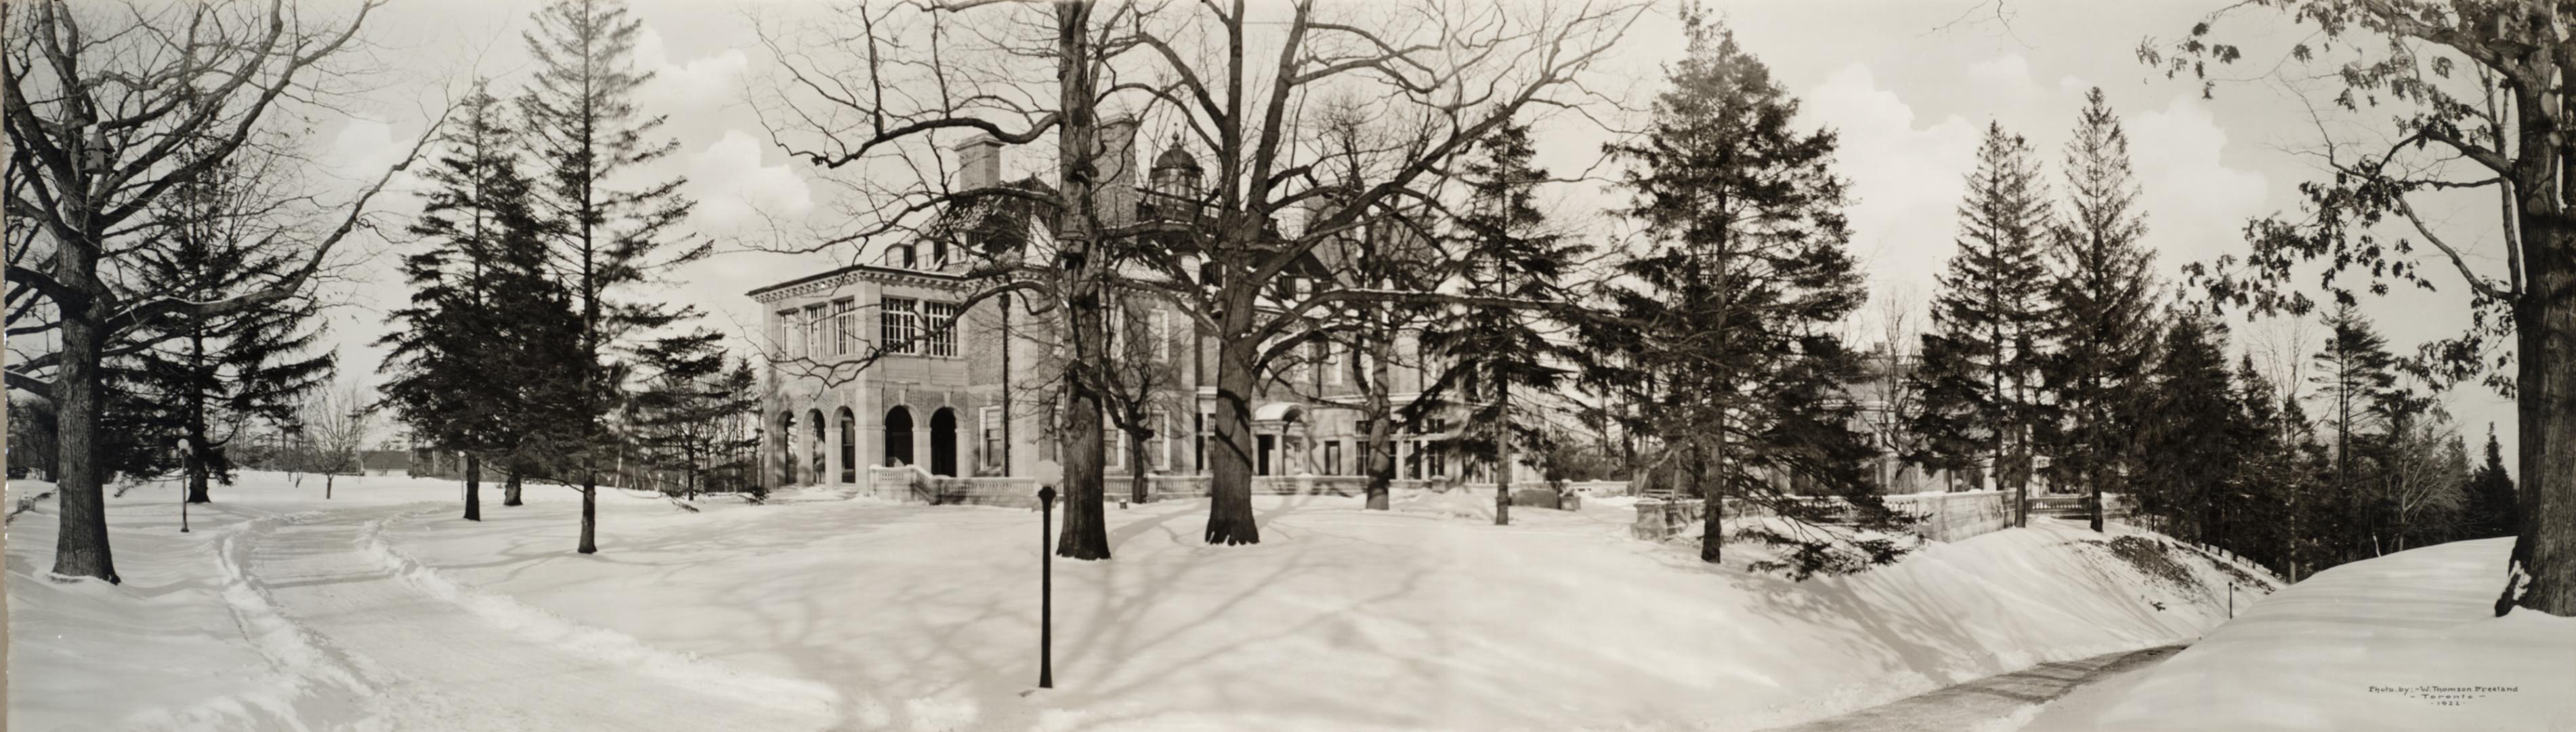 Image shows a limited view of a house in winter. There are a lot of trees around it.